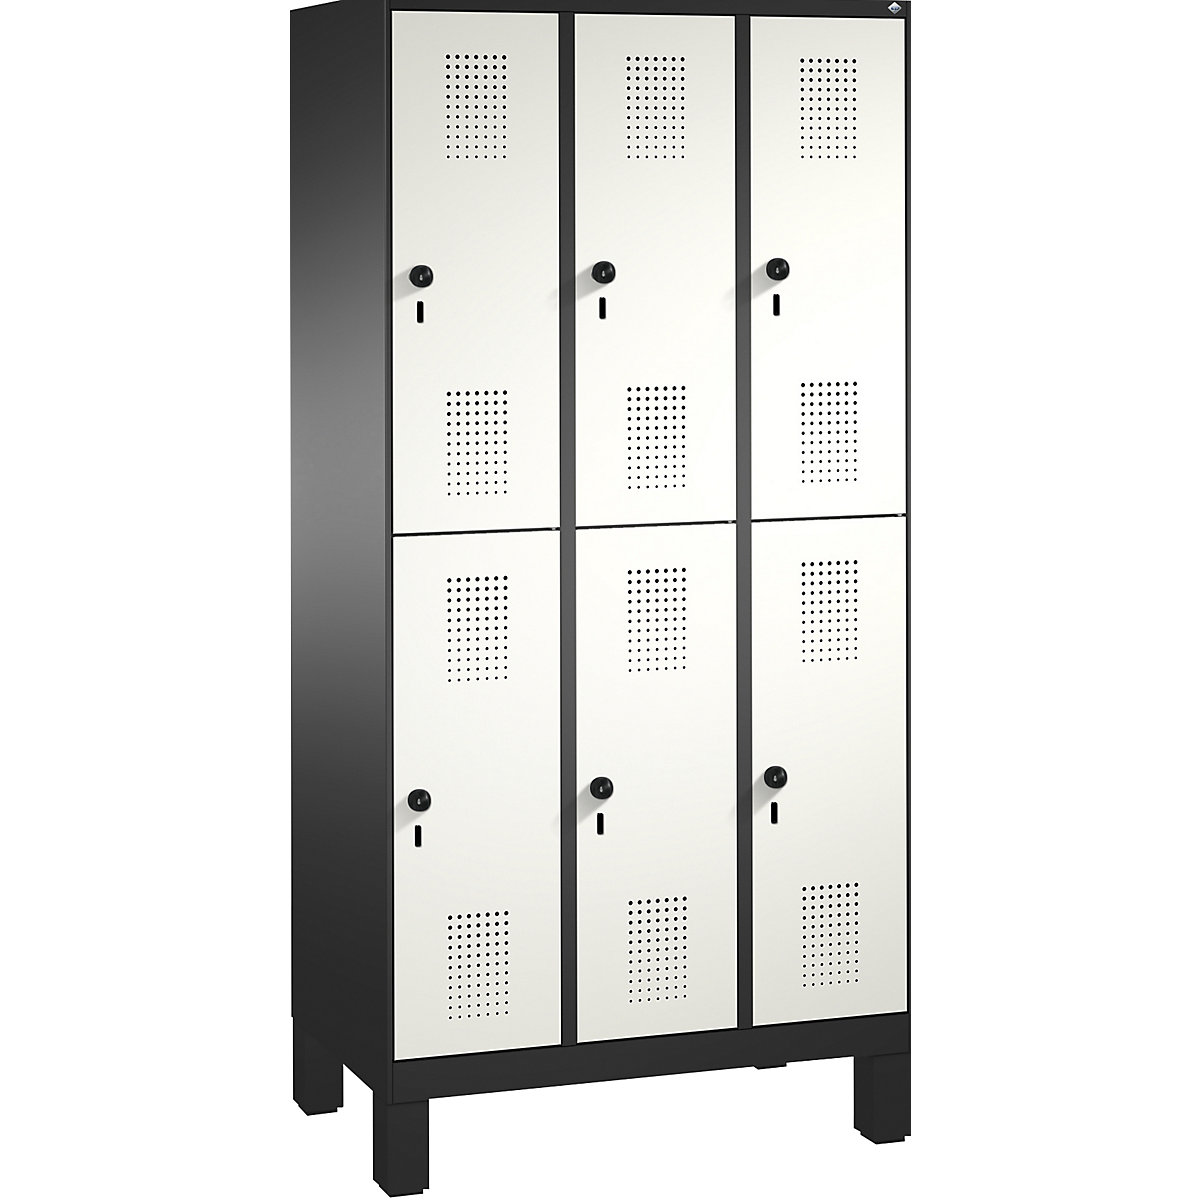 EVOLO cloakroom locker, double tier, with feet – C+P, 3 compartments, 2 shelf compartments each, compartment width 300 mm, black grey / traffic white-9